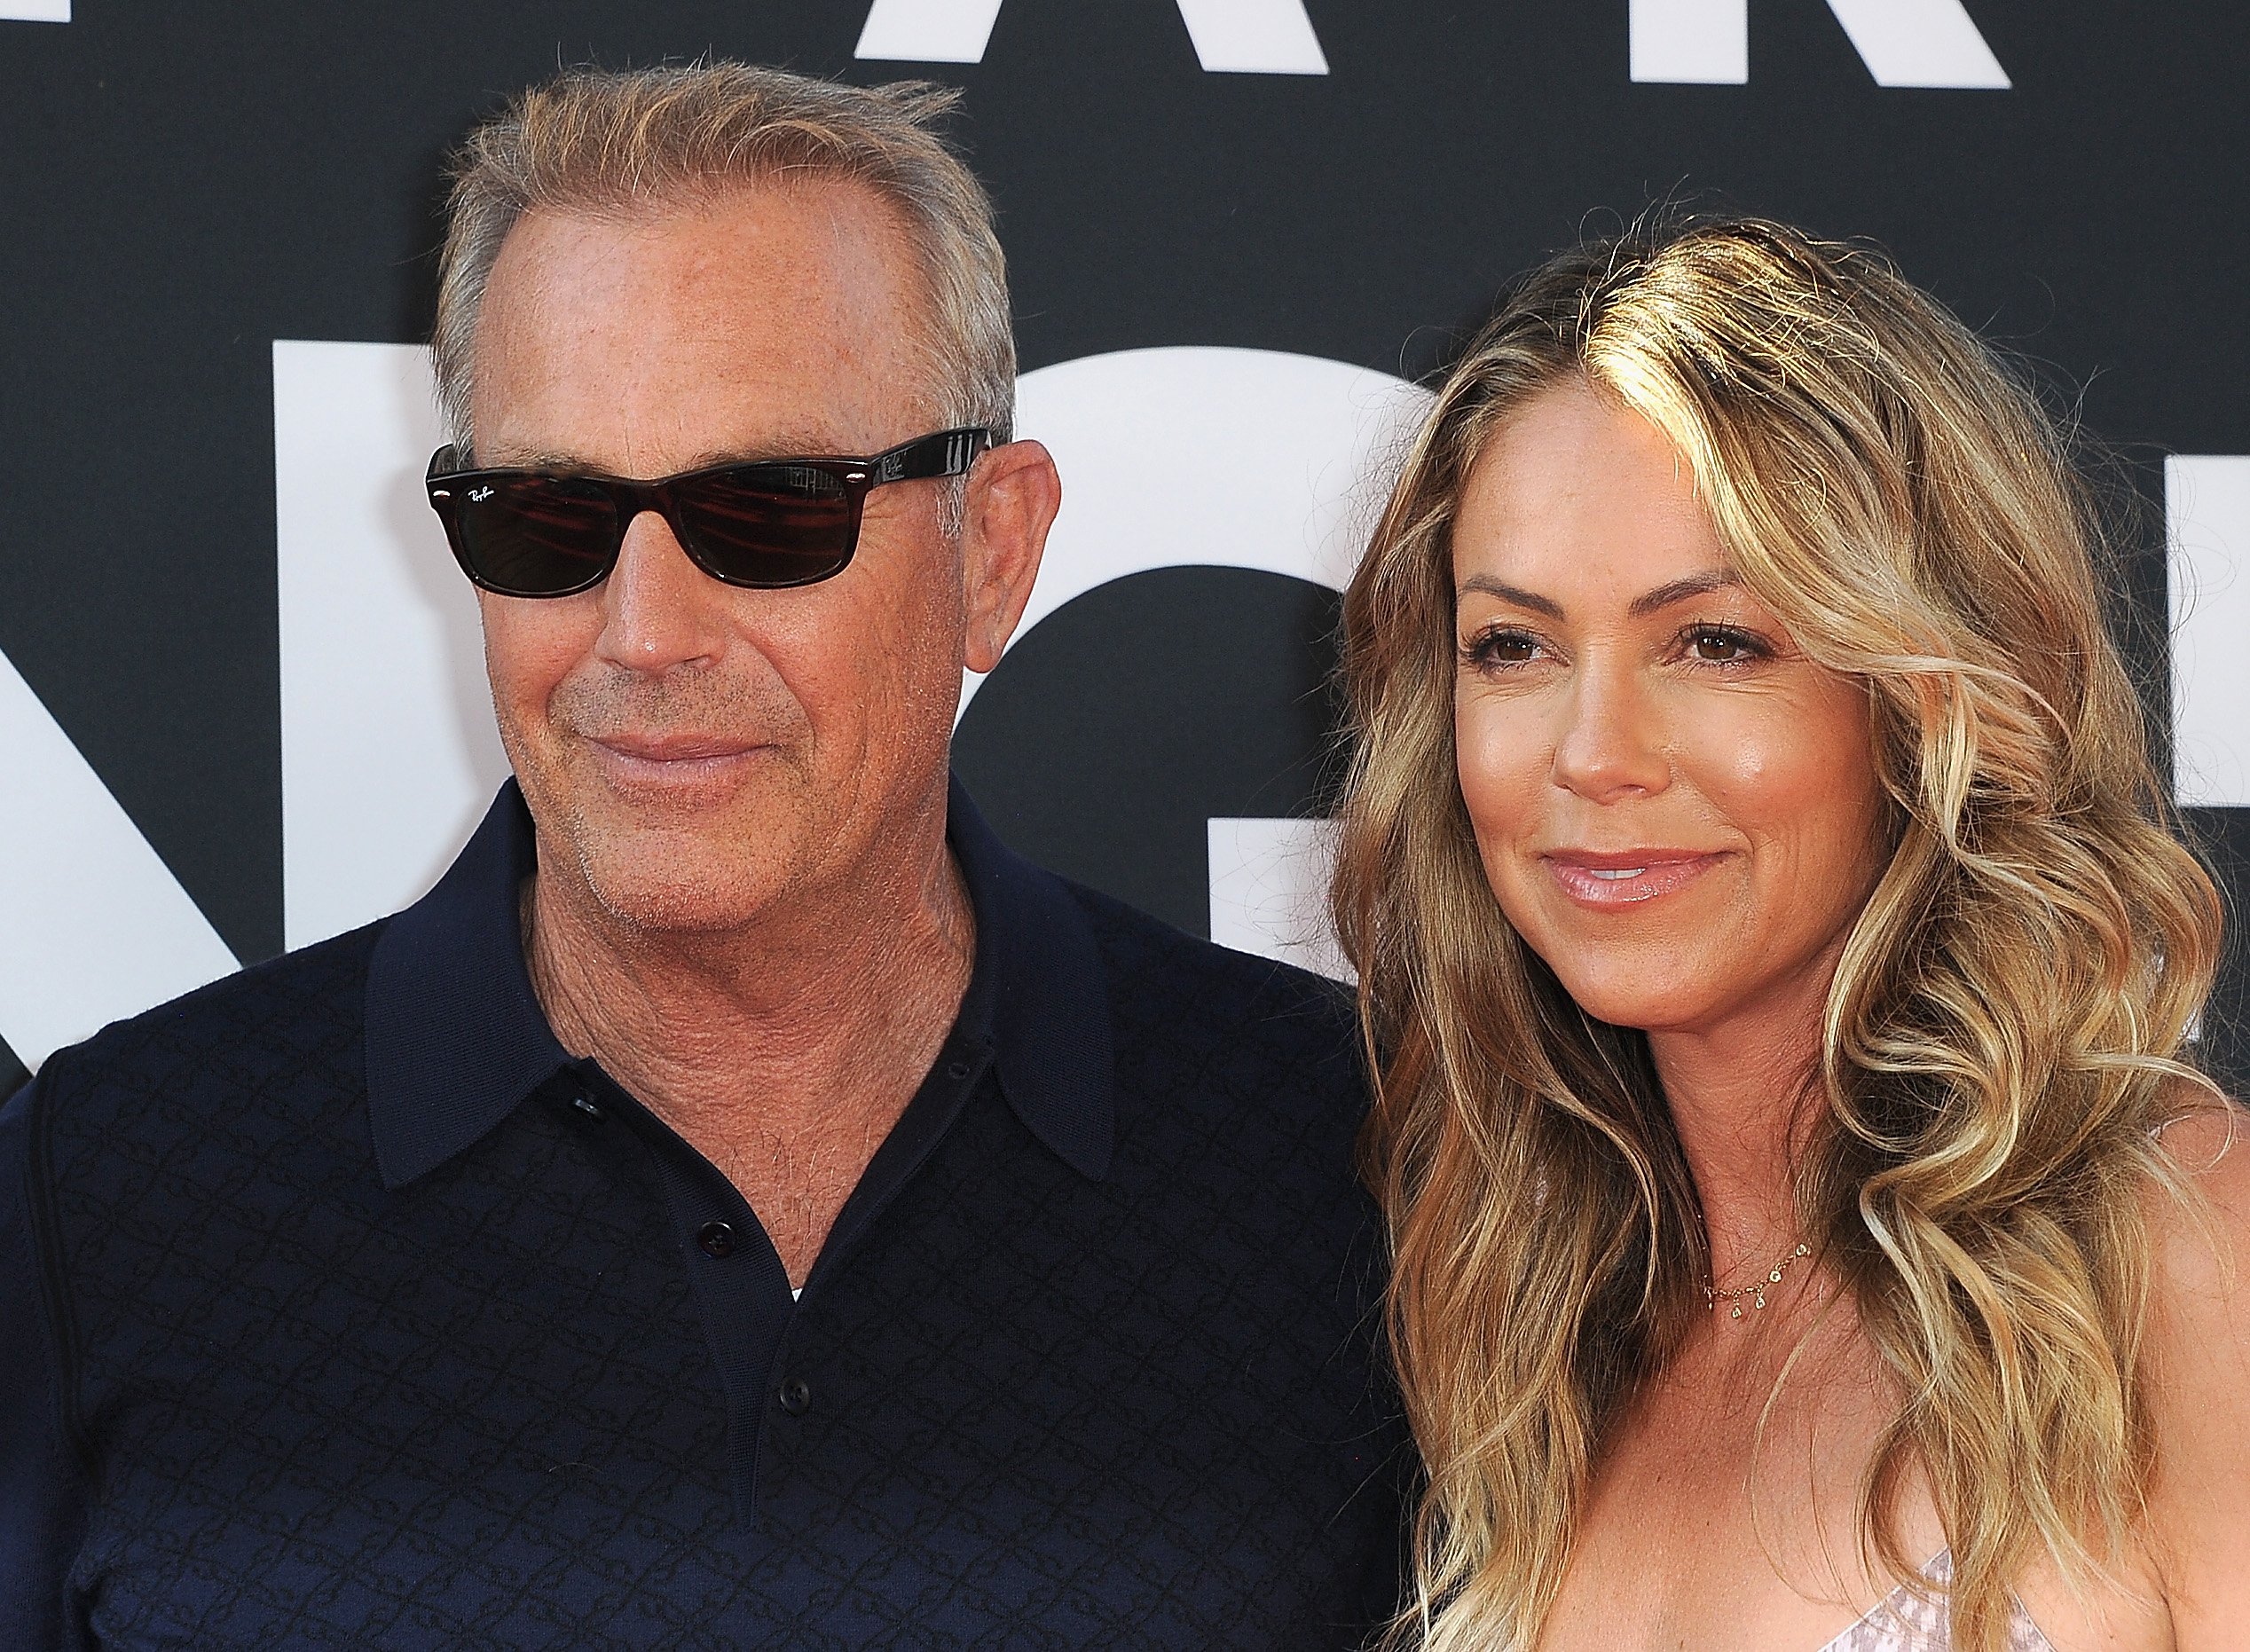 Kevin Costner and his wife Christine Baumgartner arrive for the Premiere Of 20th Century Fox's "The Art Of Racing In The Rain" held at El Capitan Theatre on August 1, 2019, in Los Angeles, California. | Source: Getty Images